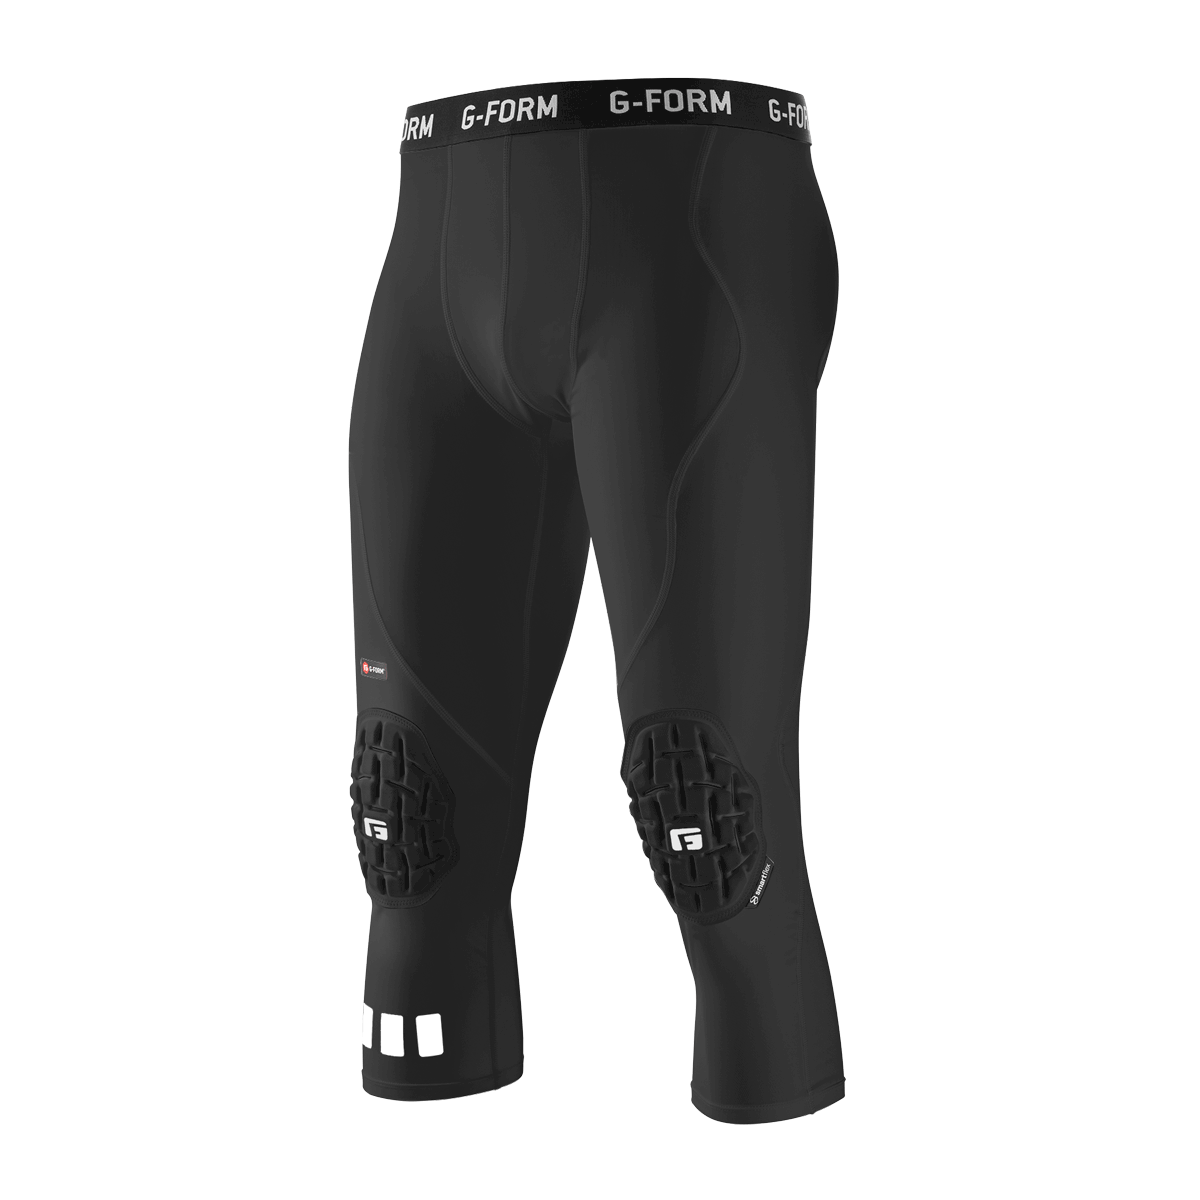 3/4 Compression Pants with Knee Pads | Basketball